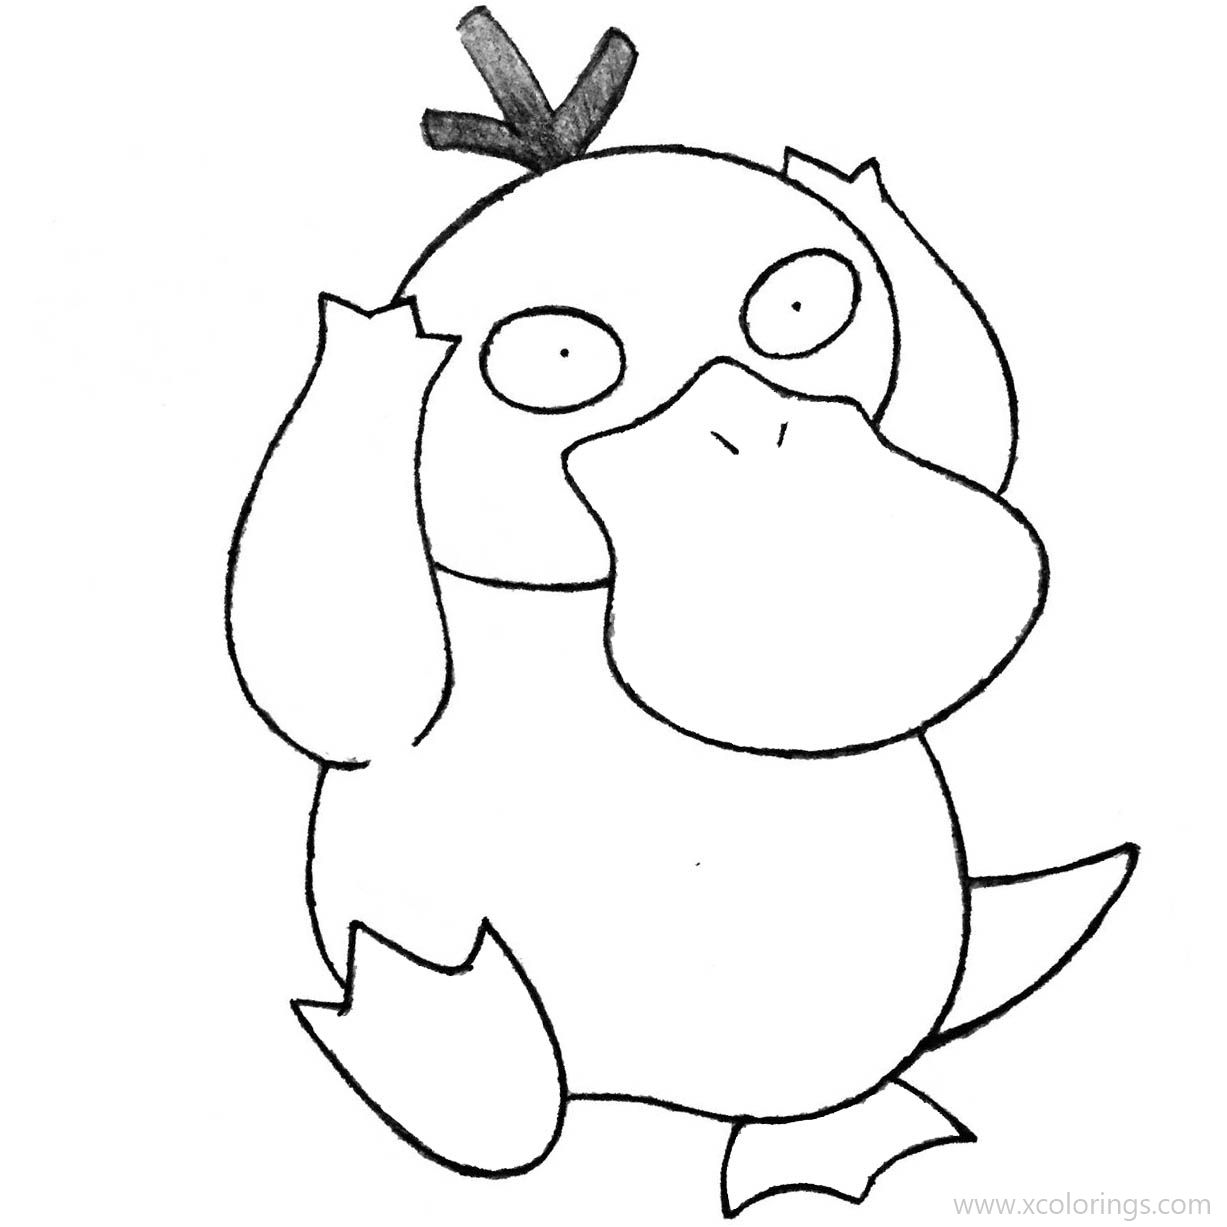 Psyduck Pokemon Coloring Pages Sketch Coloring Page - vrogue.co